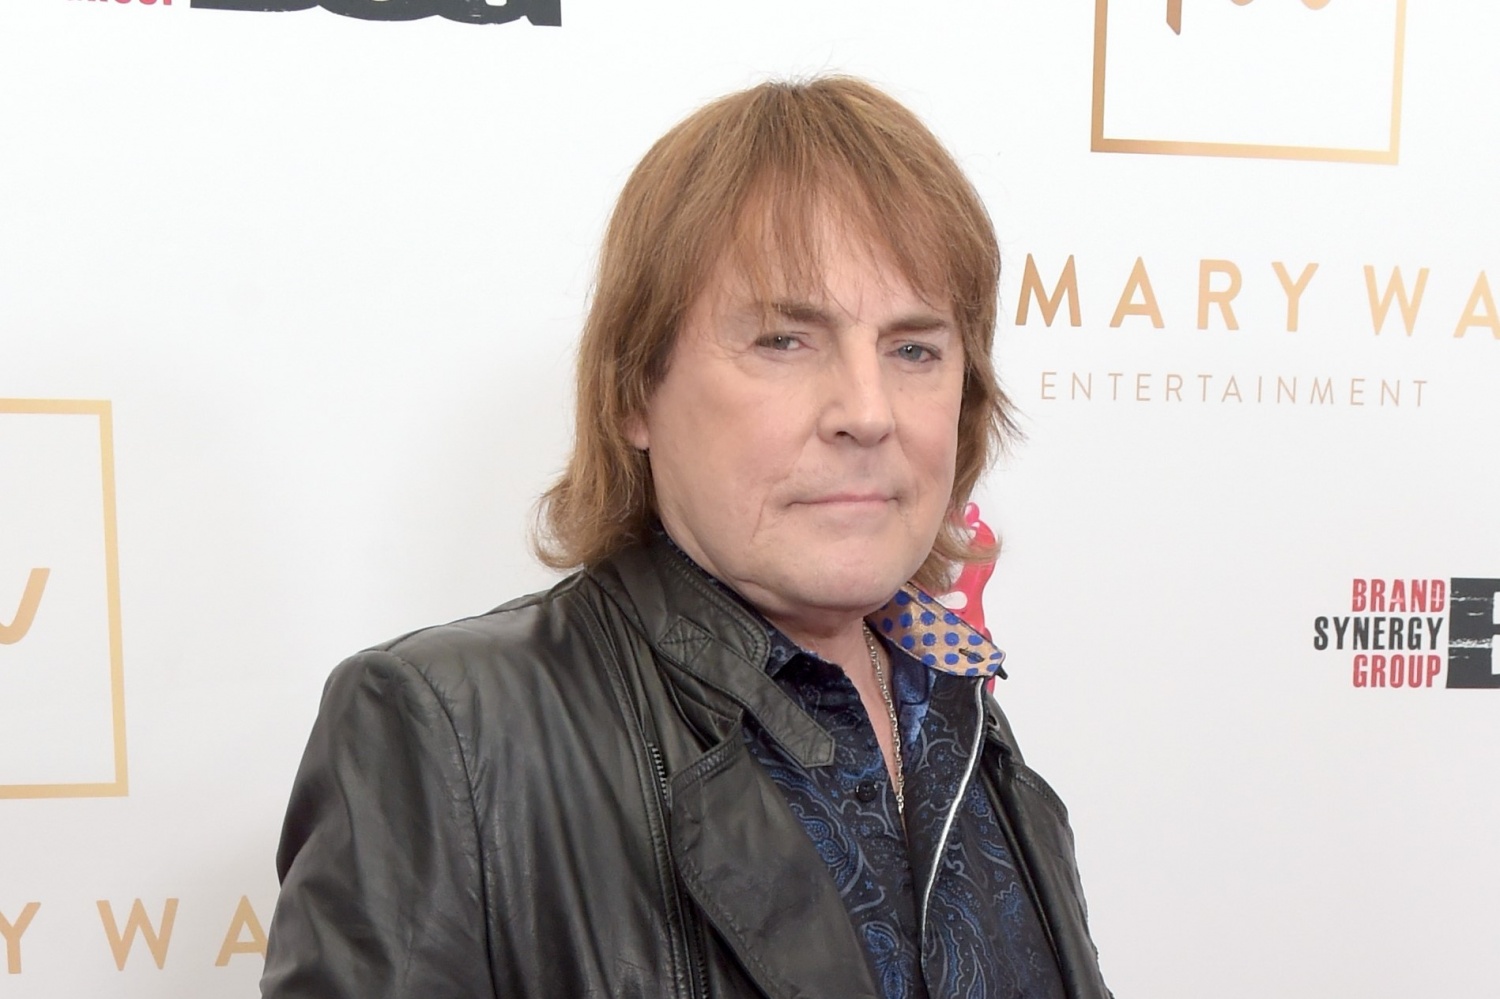 What Happened to Don Dokken's Voice? Singer Slams Critics After Vocal Issues